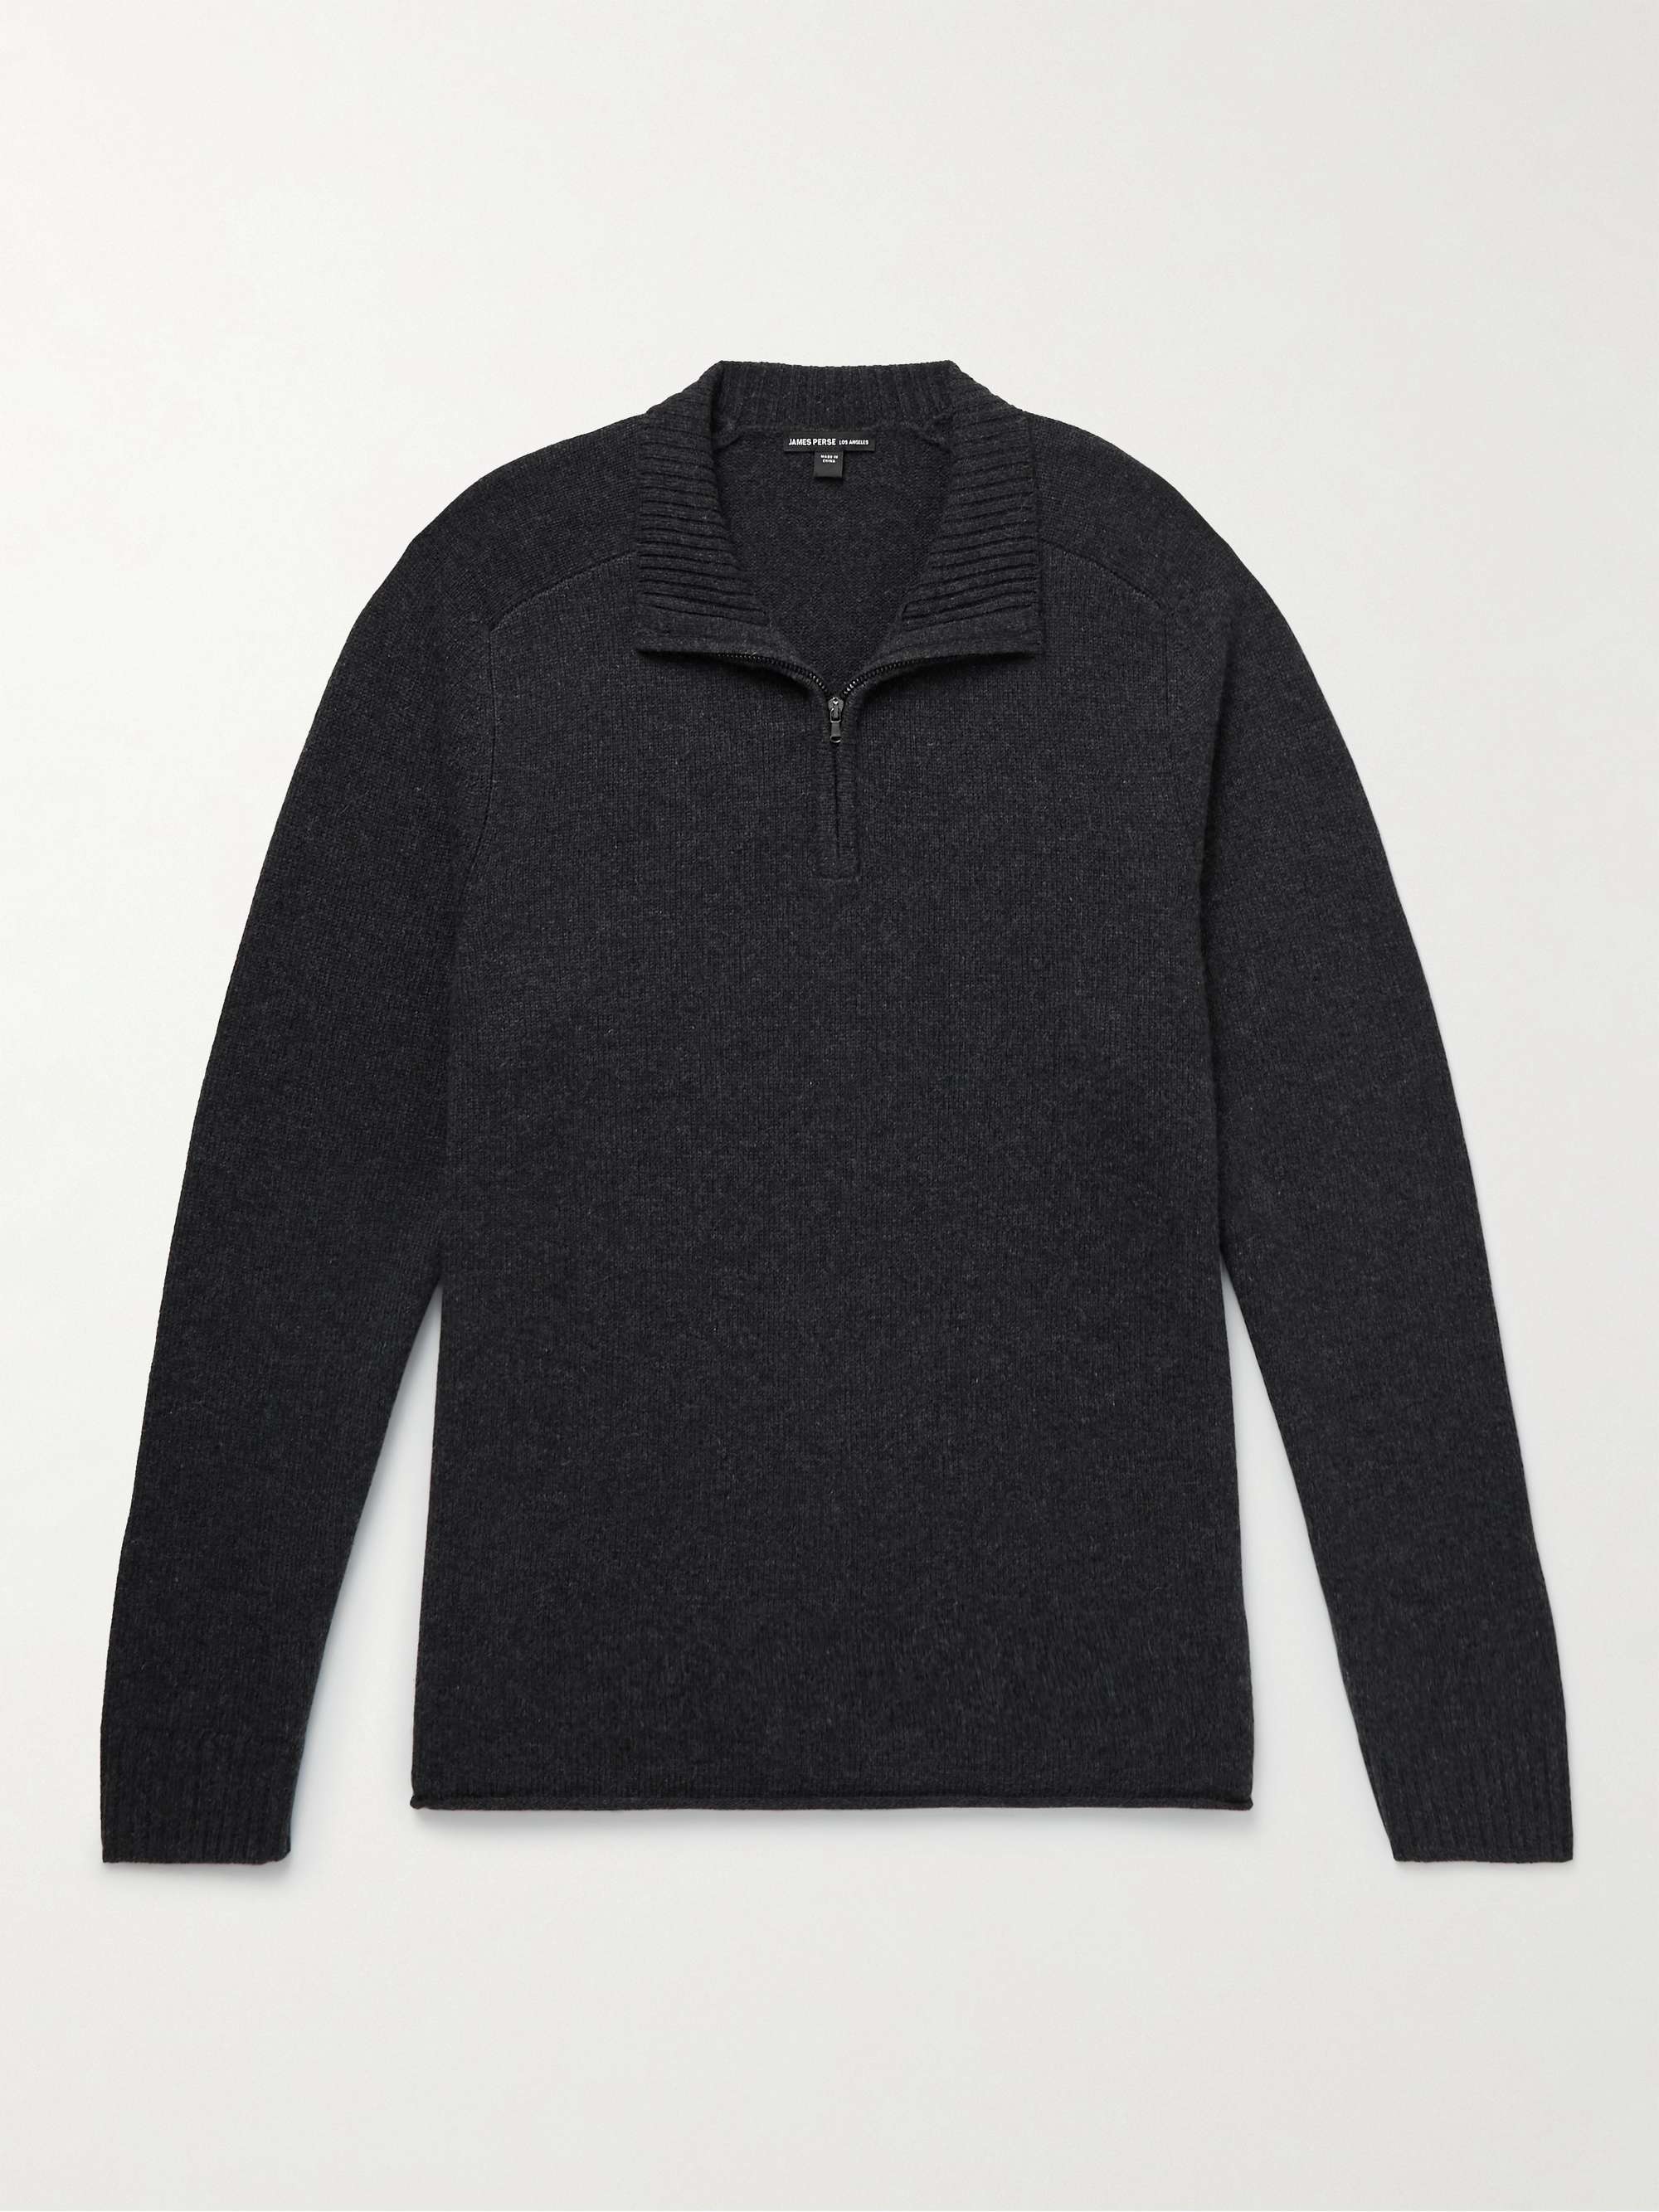 JAMES PERSE Saddle Recycled-Cashmere Half-Zip Sweater